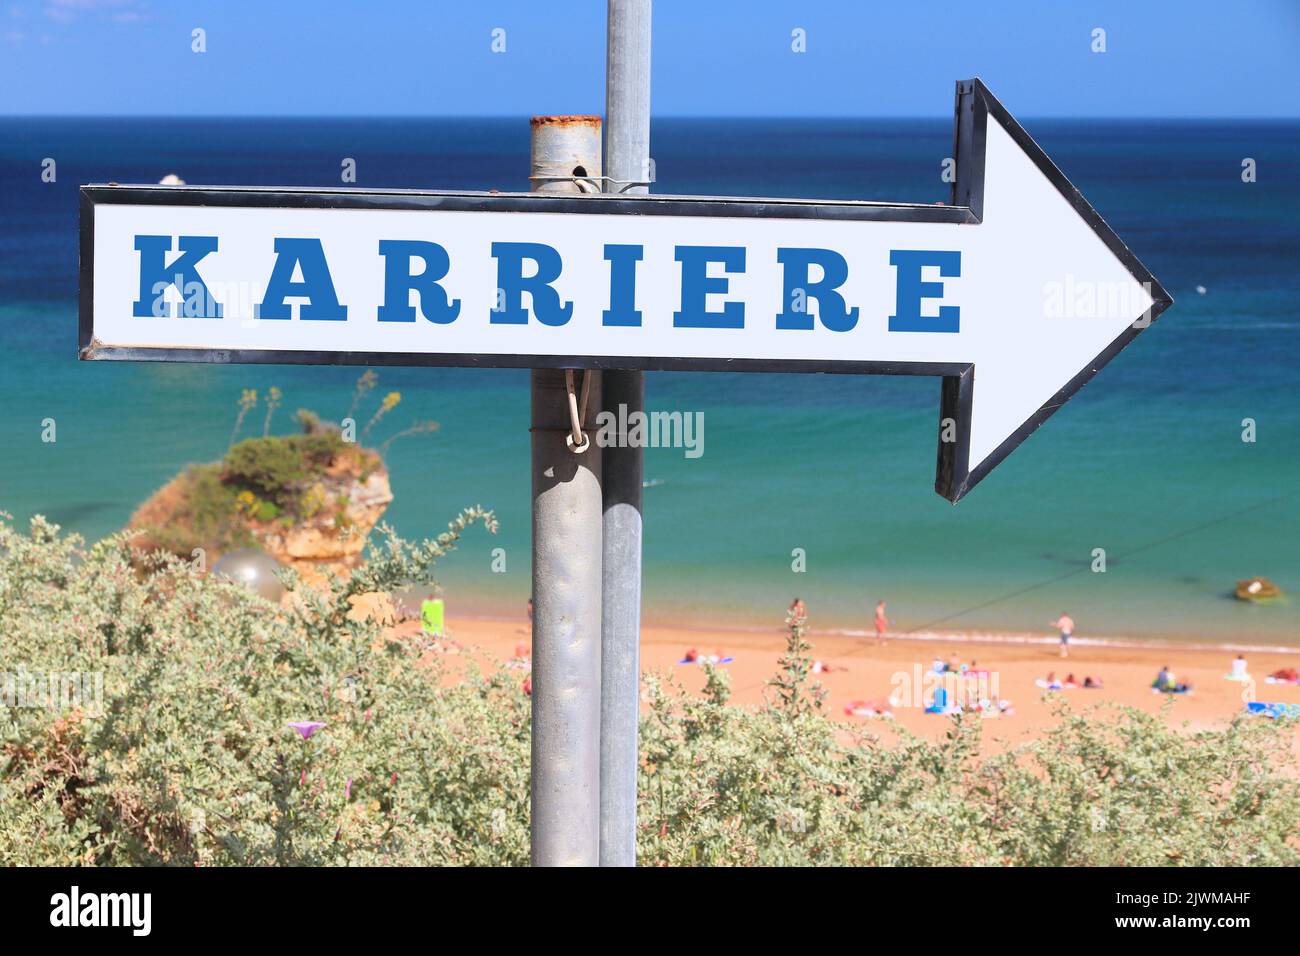 Karriere - career in German language. Beach sign text. Stock Photo